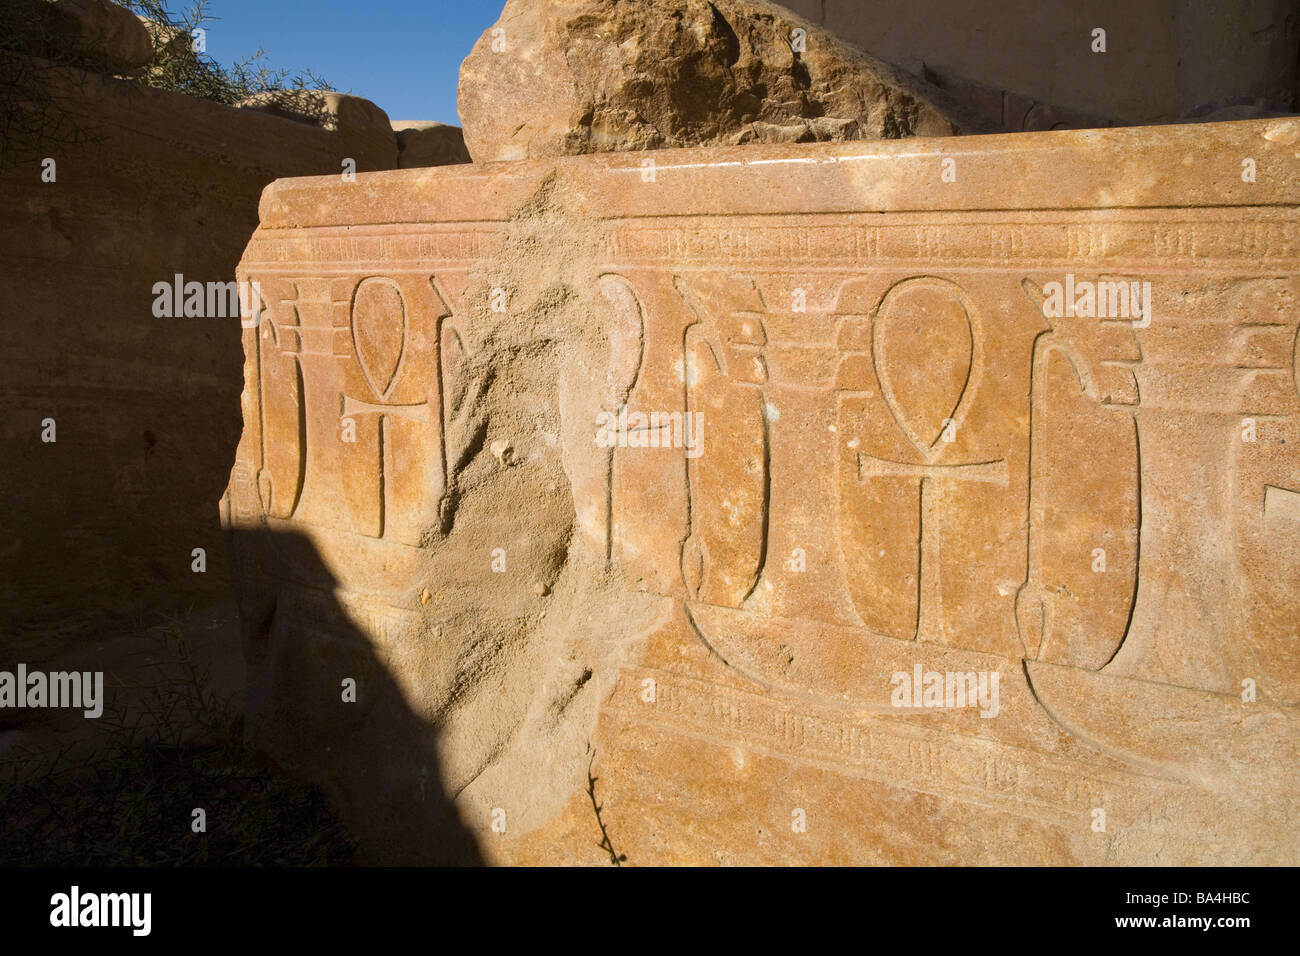 Close up detail of Ankh, Was Sceptre and Djed Pillar hieroglyphs carved on block at Karnak Temple, Luxor Egypt Stock Photo